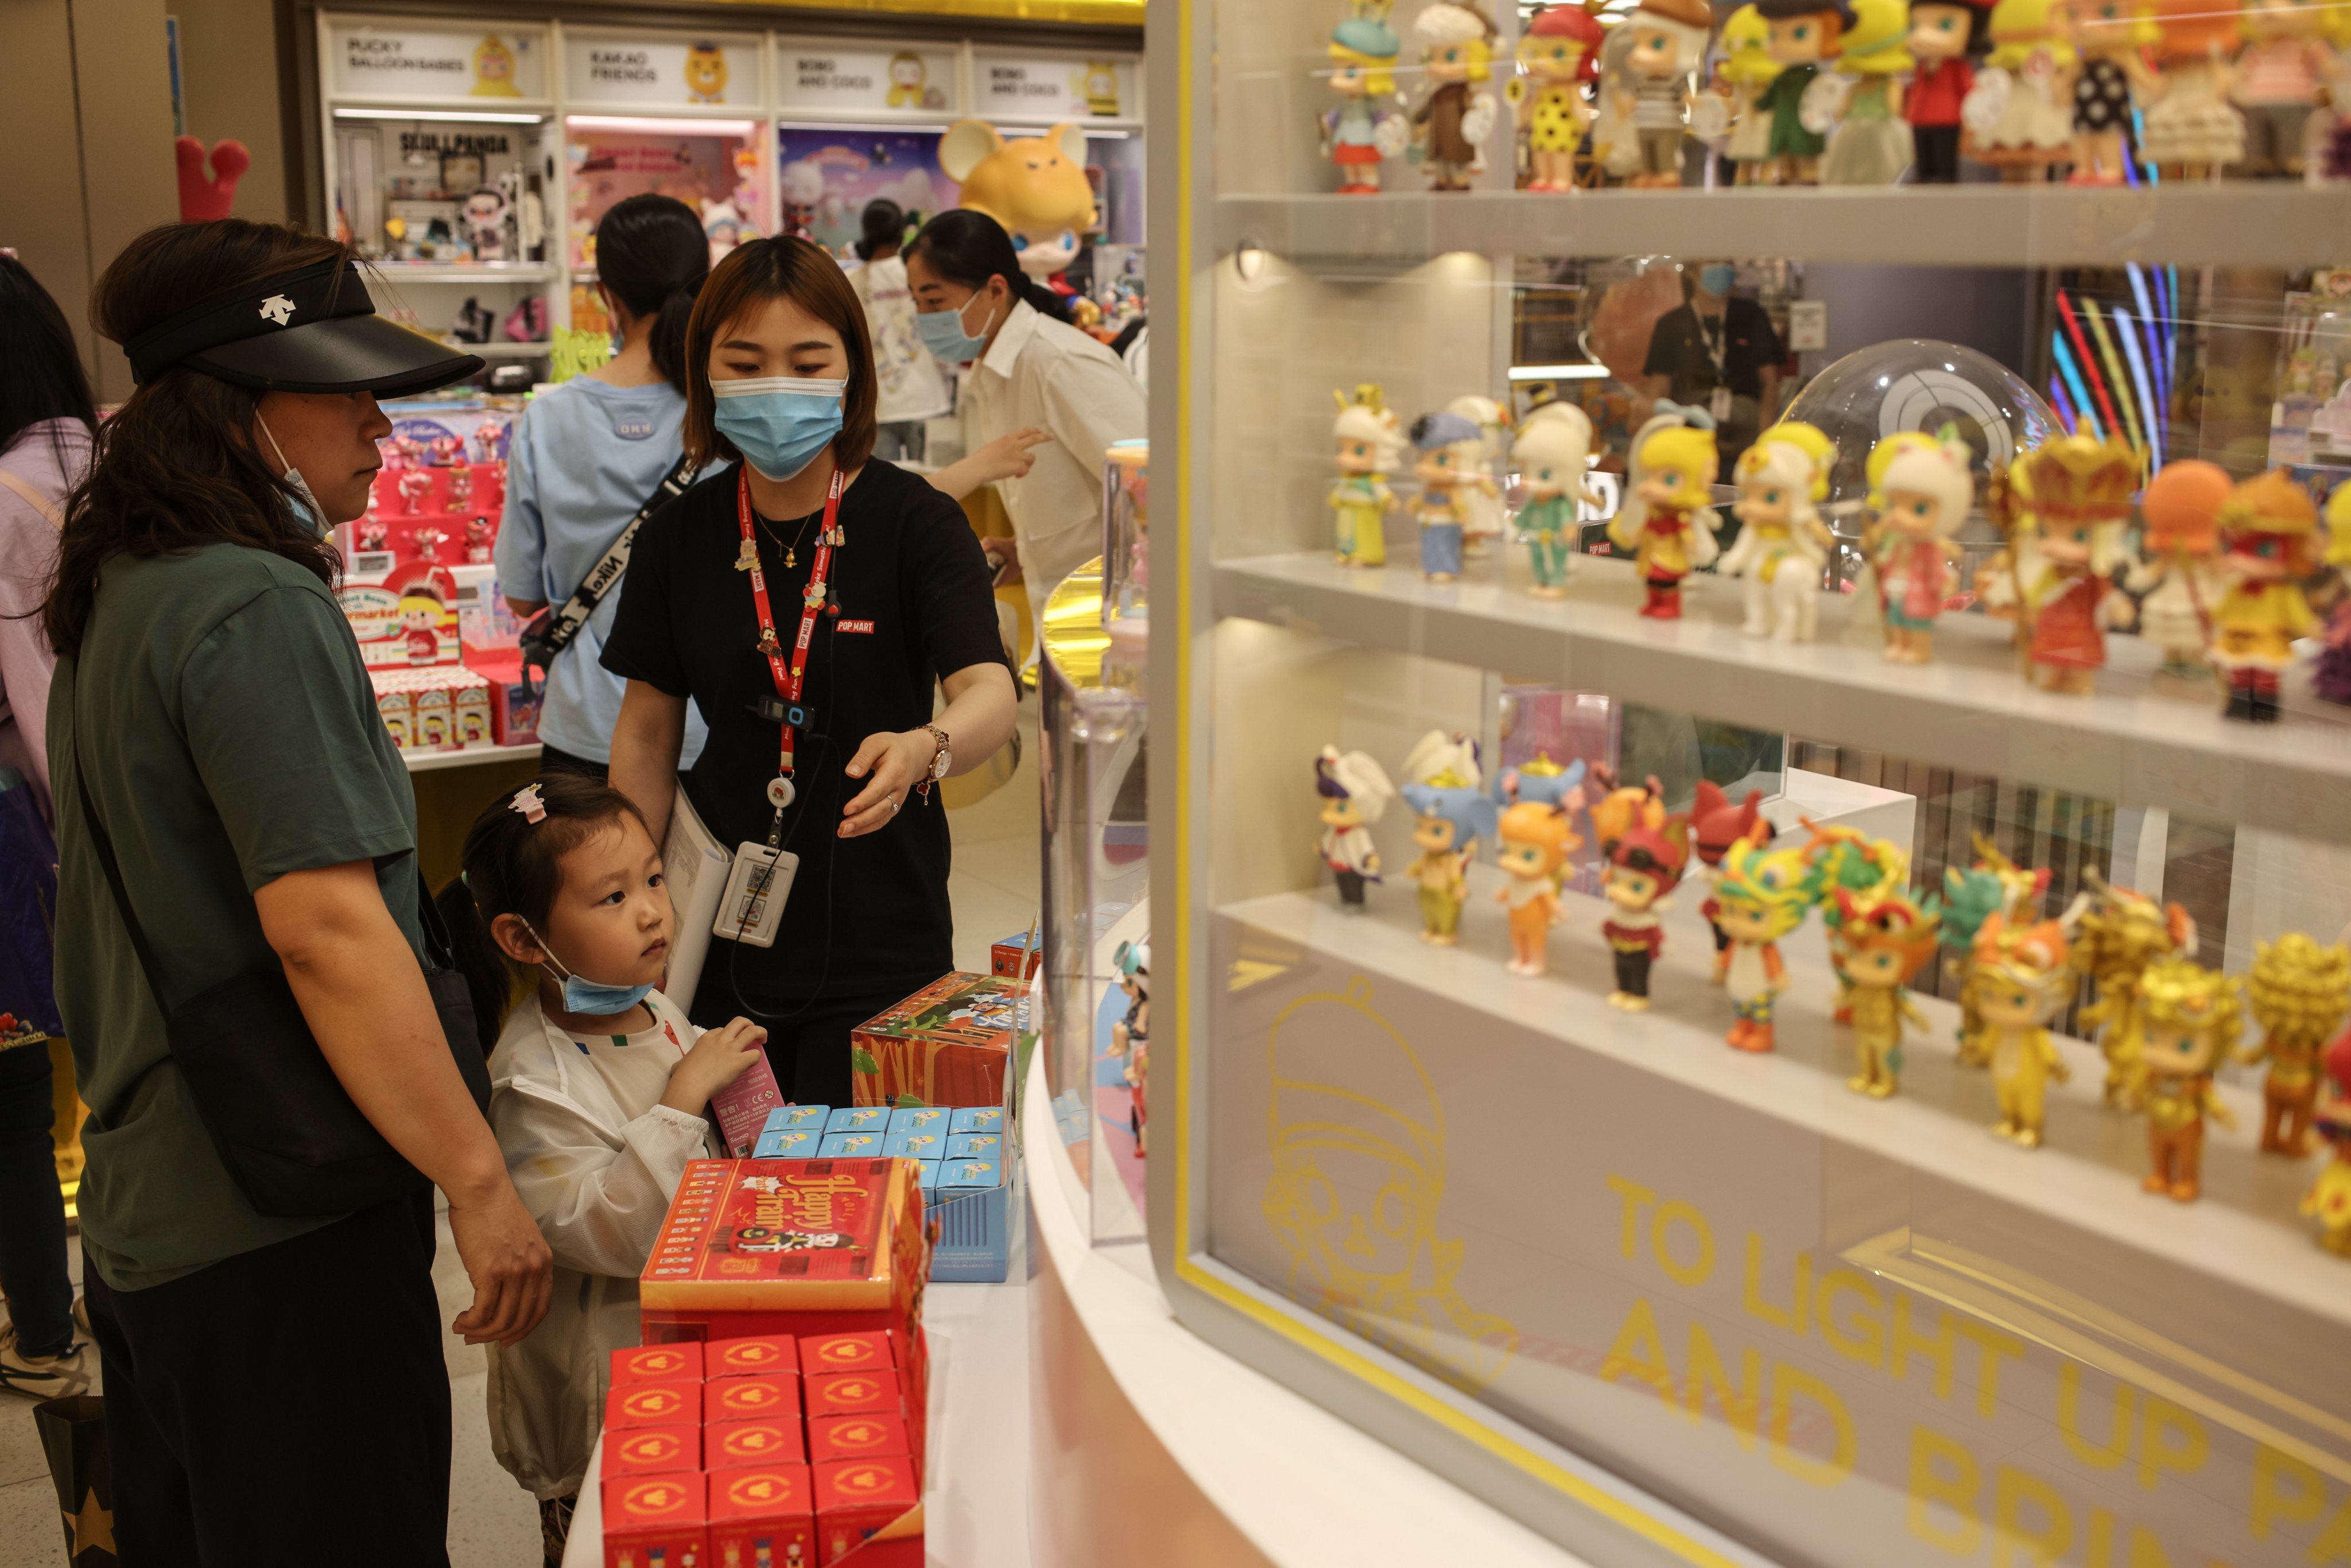 A child takes in the display at a store in Beijing. Photo: EPA-EFE